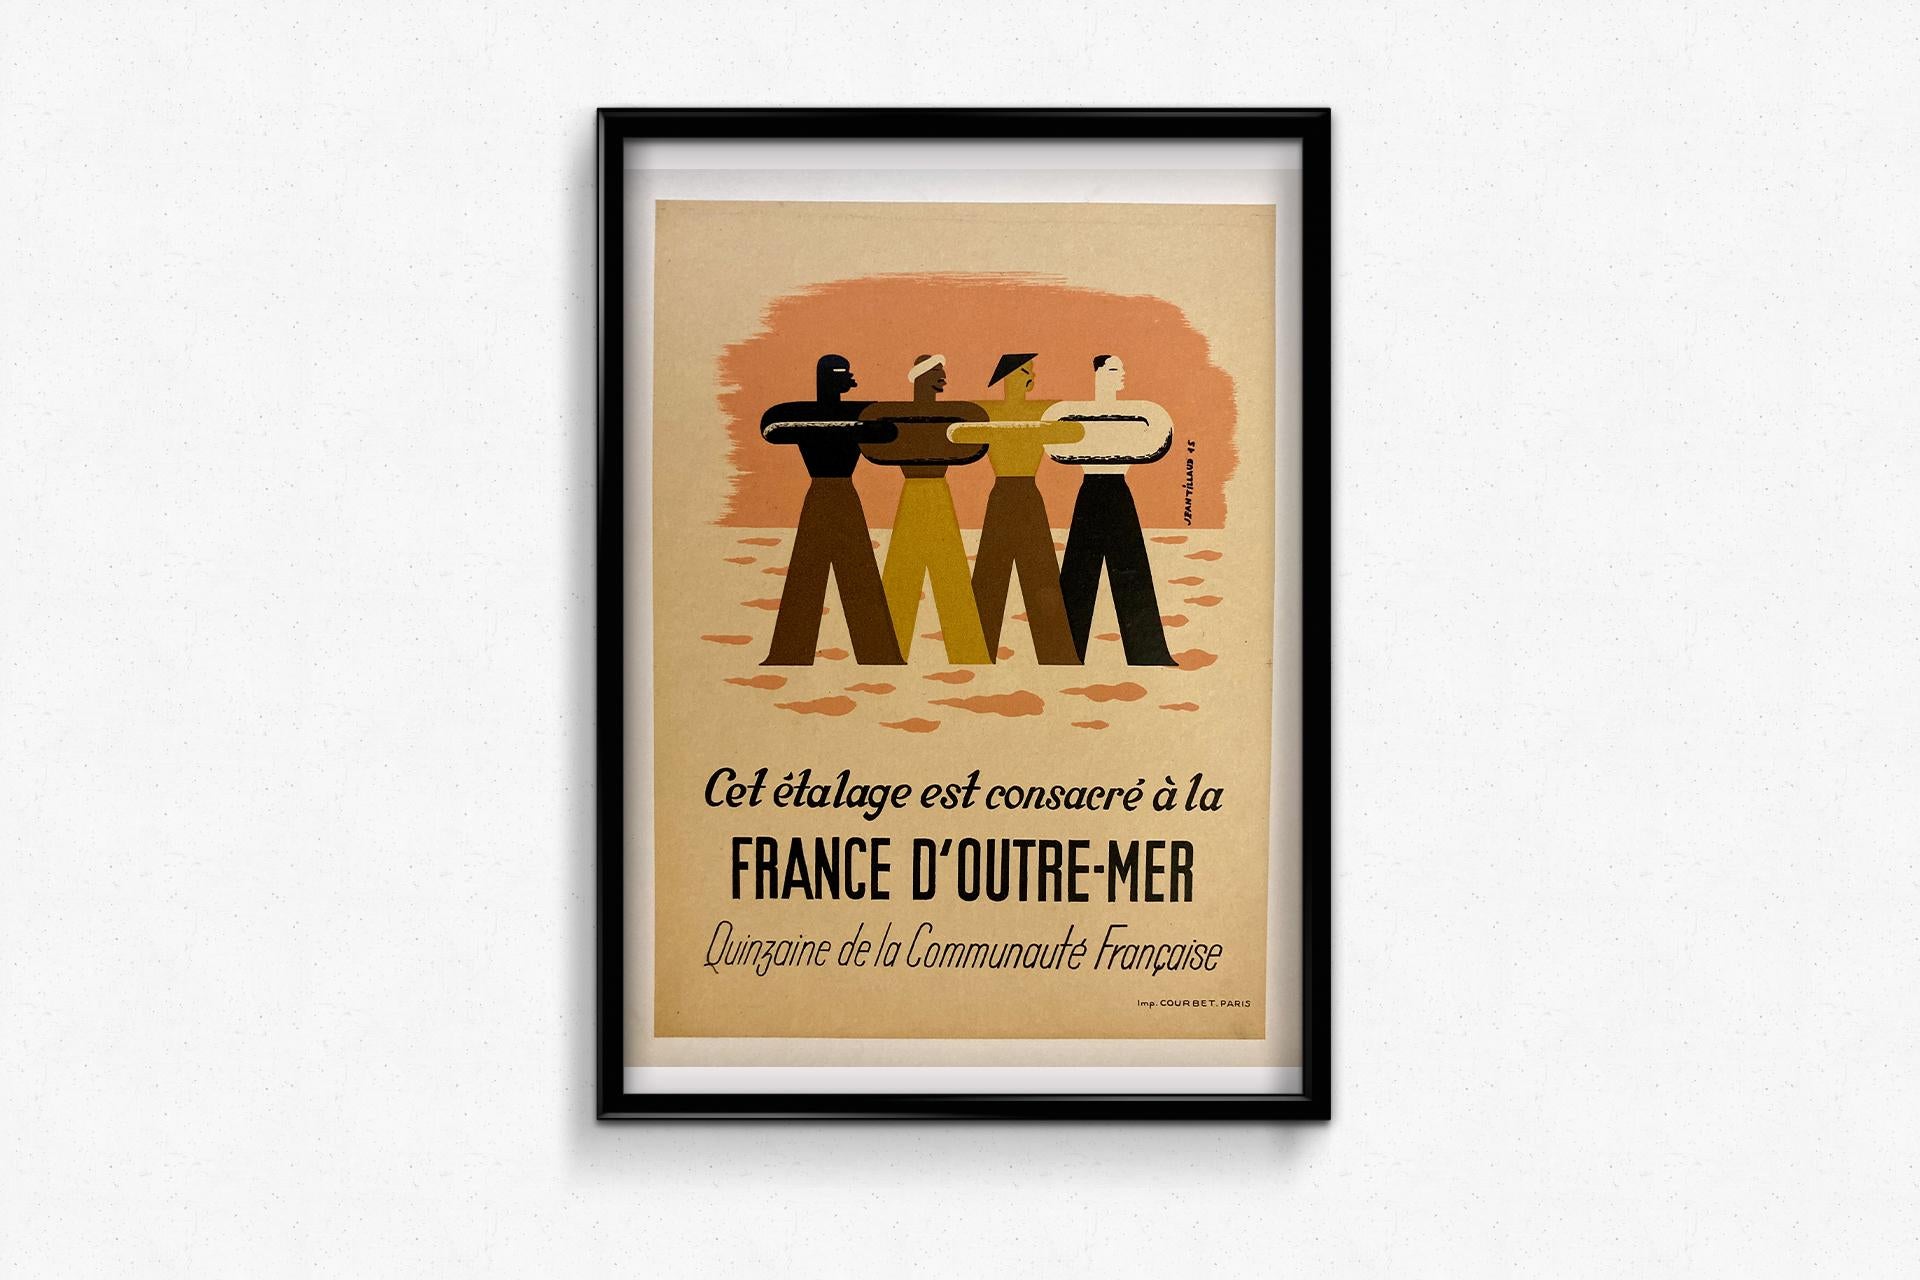 A nice poster made by Jean Tillaud in 1945 to promote the Quinzaine de la Communauté Française.
During this event, the diversity of the colonial world was presented to French youth through films, conferences, books and publications.

The Empire was